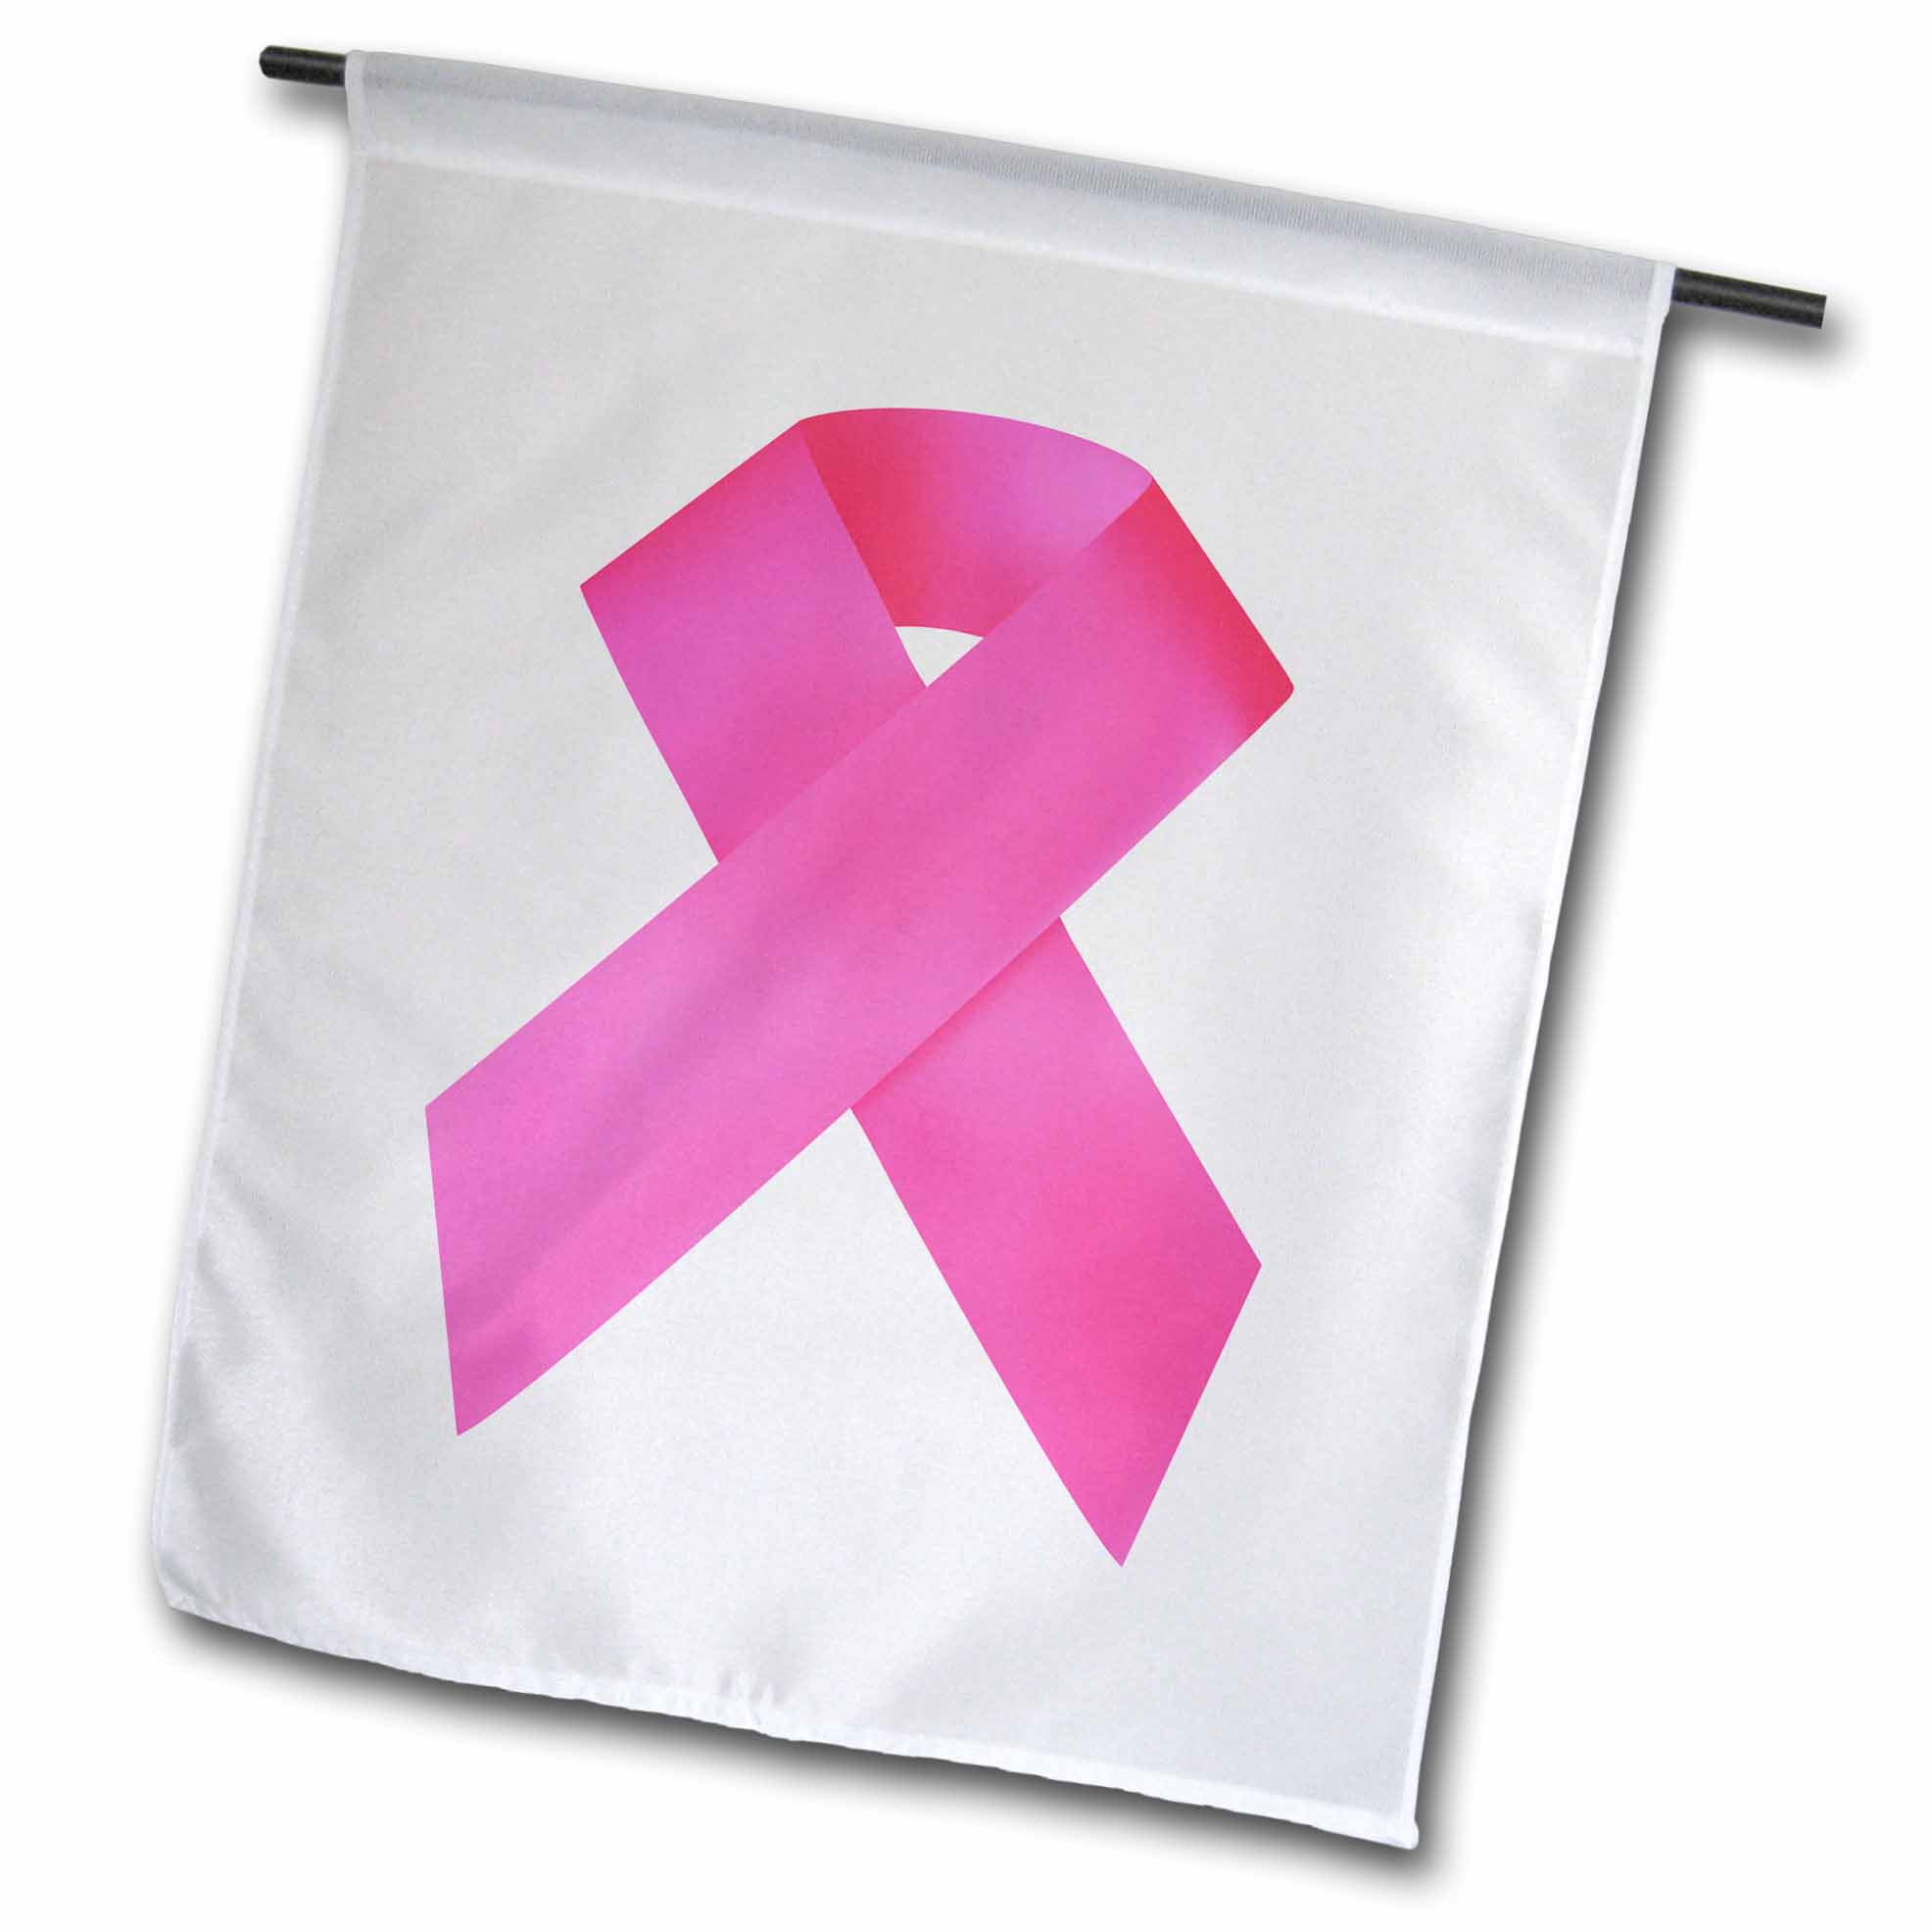 3dRose Breast Cancer Awareness Pink Ribbon - Garden Flag, 12 by 18-inch ...